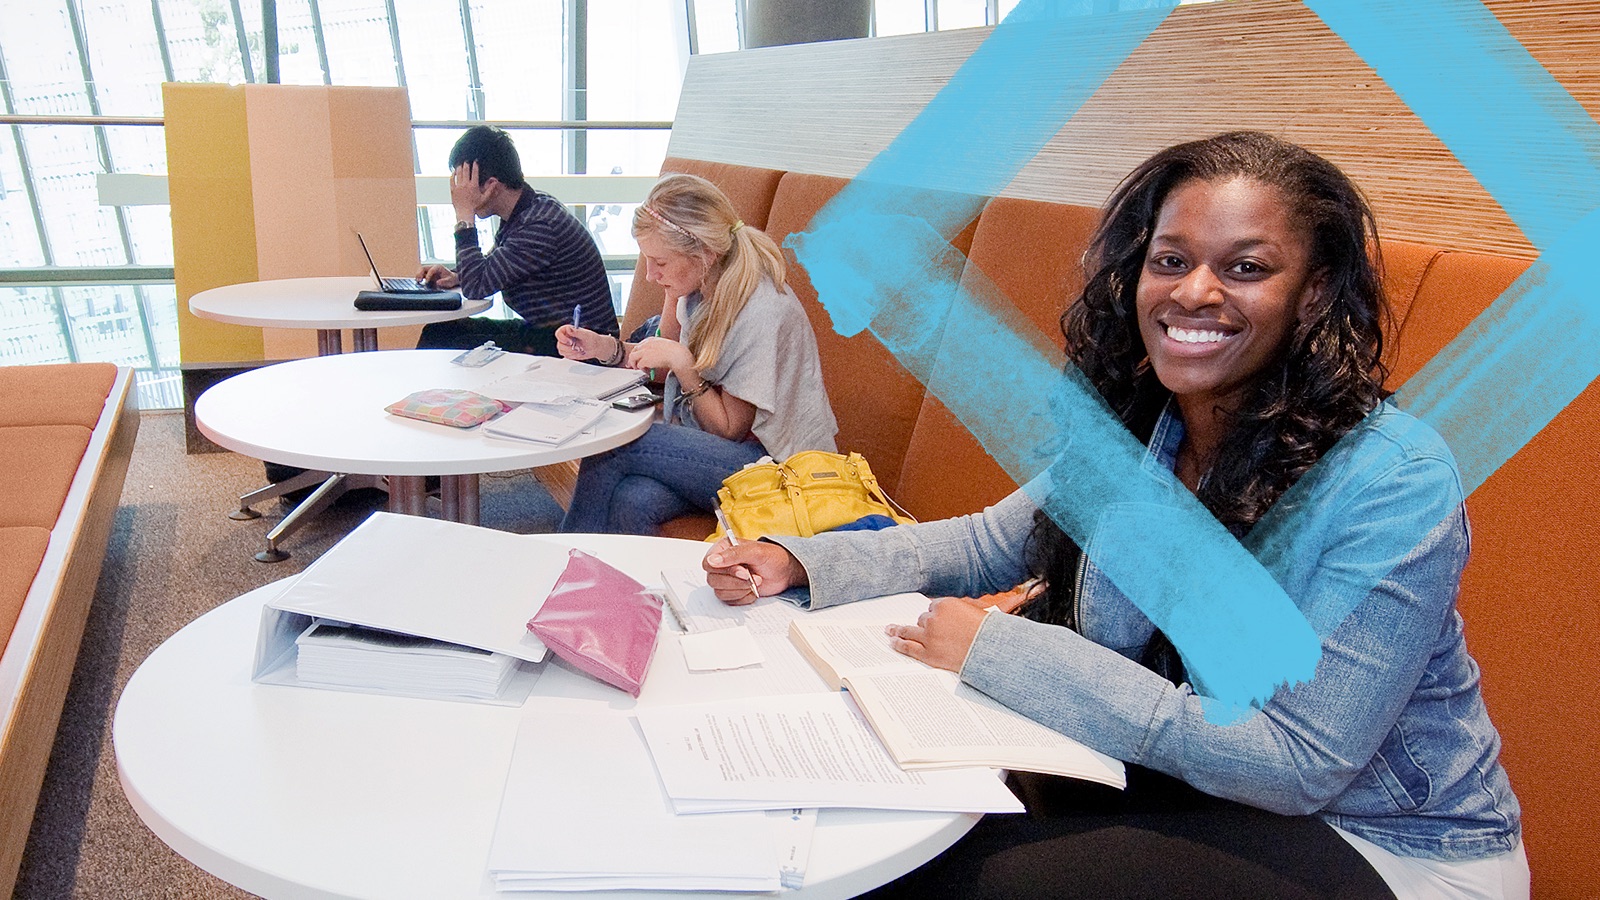 A smiling student studying in the library's study area, with two other students in the background.